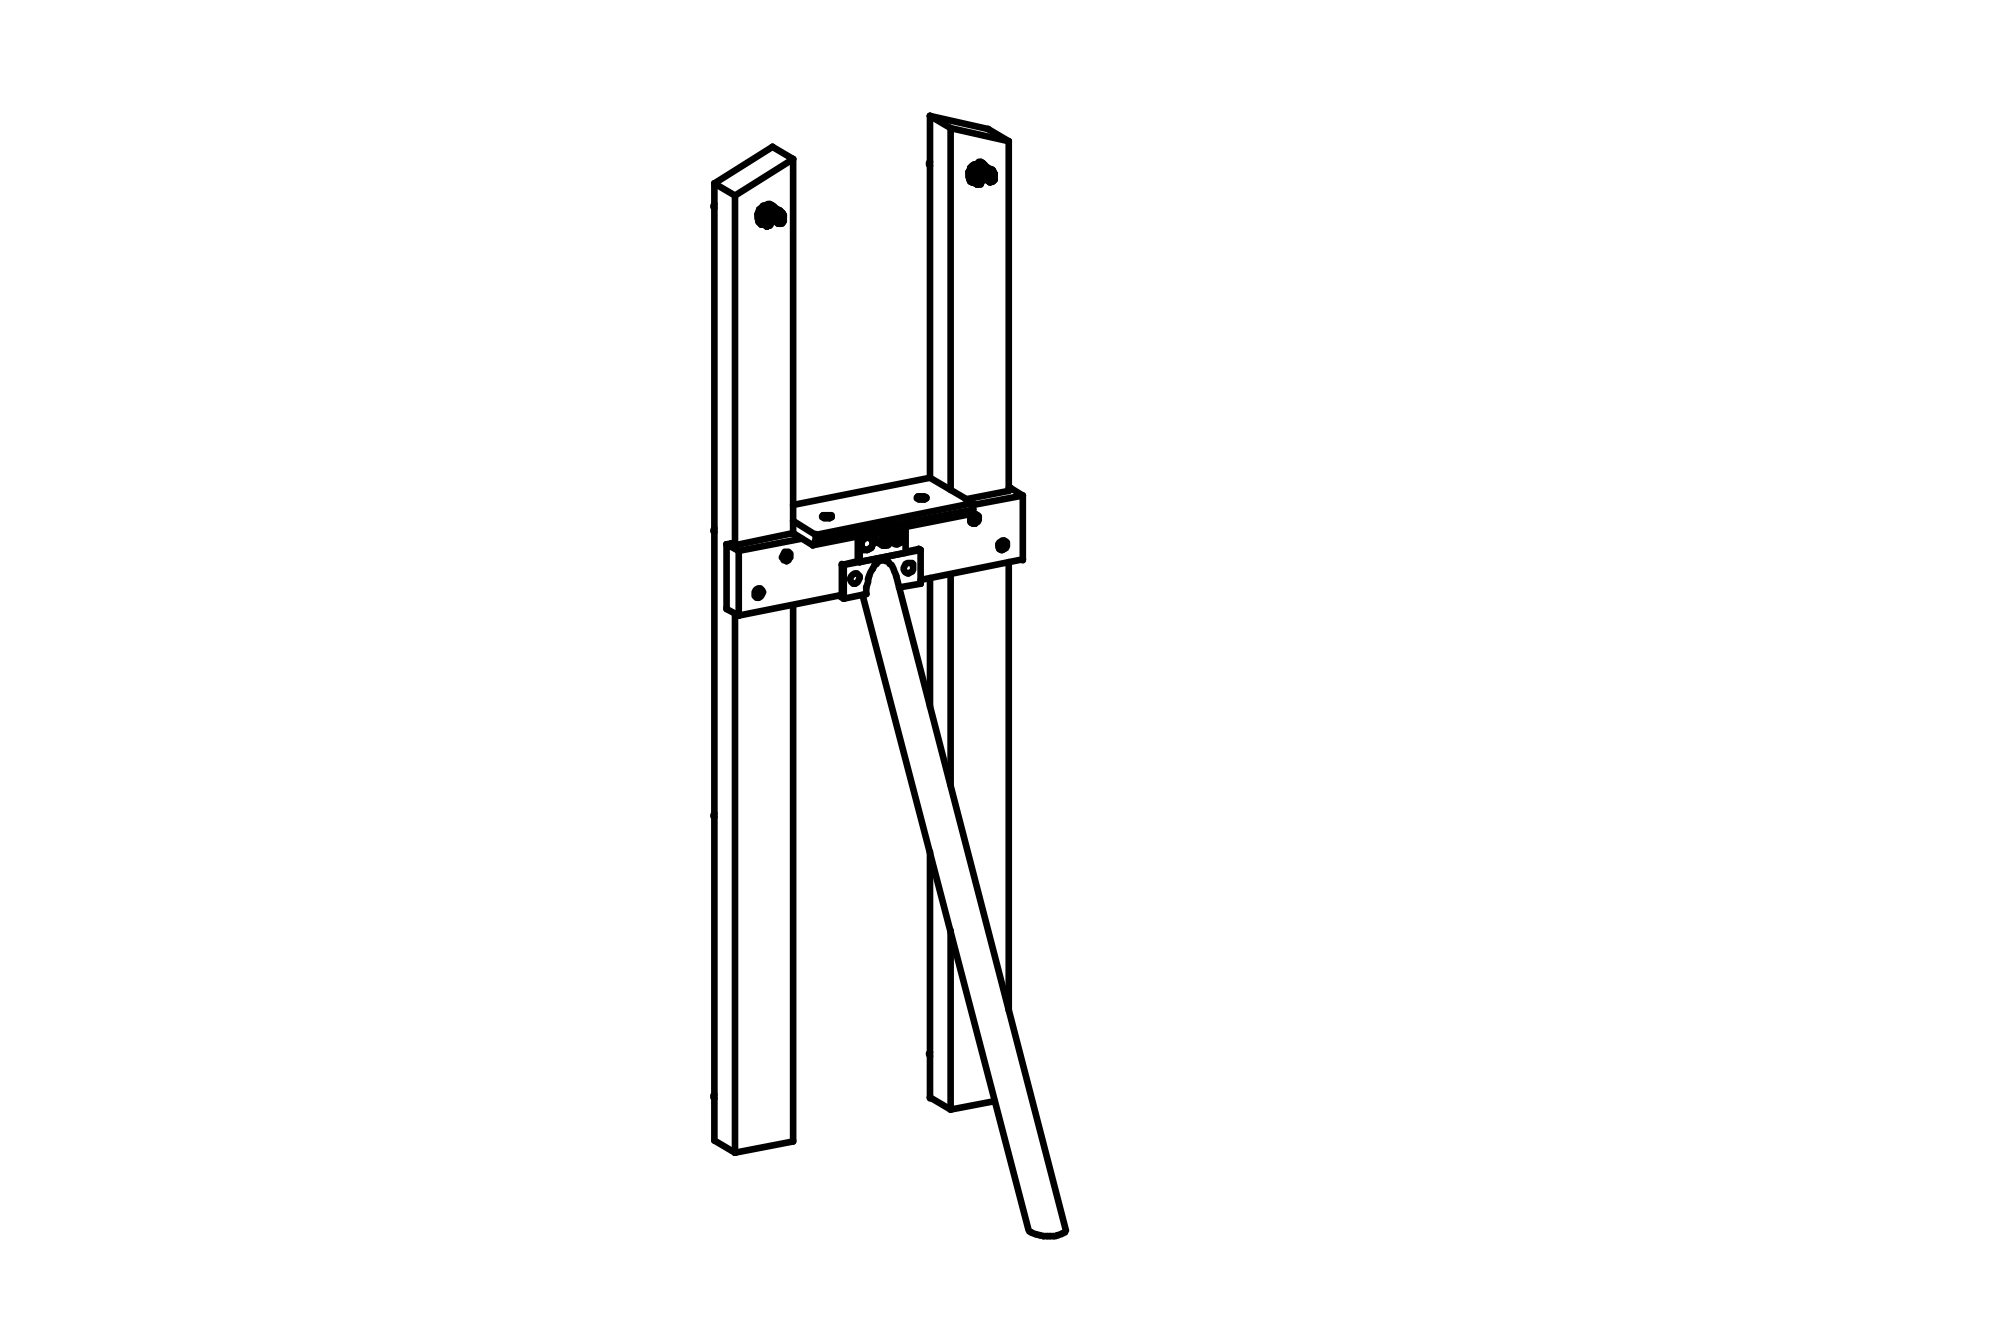 Support Frame for Small Square Tower